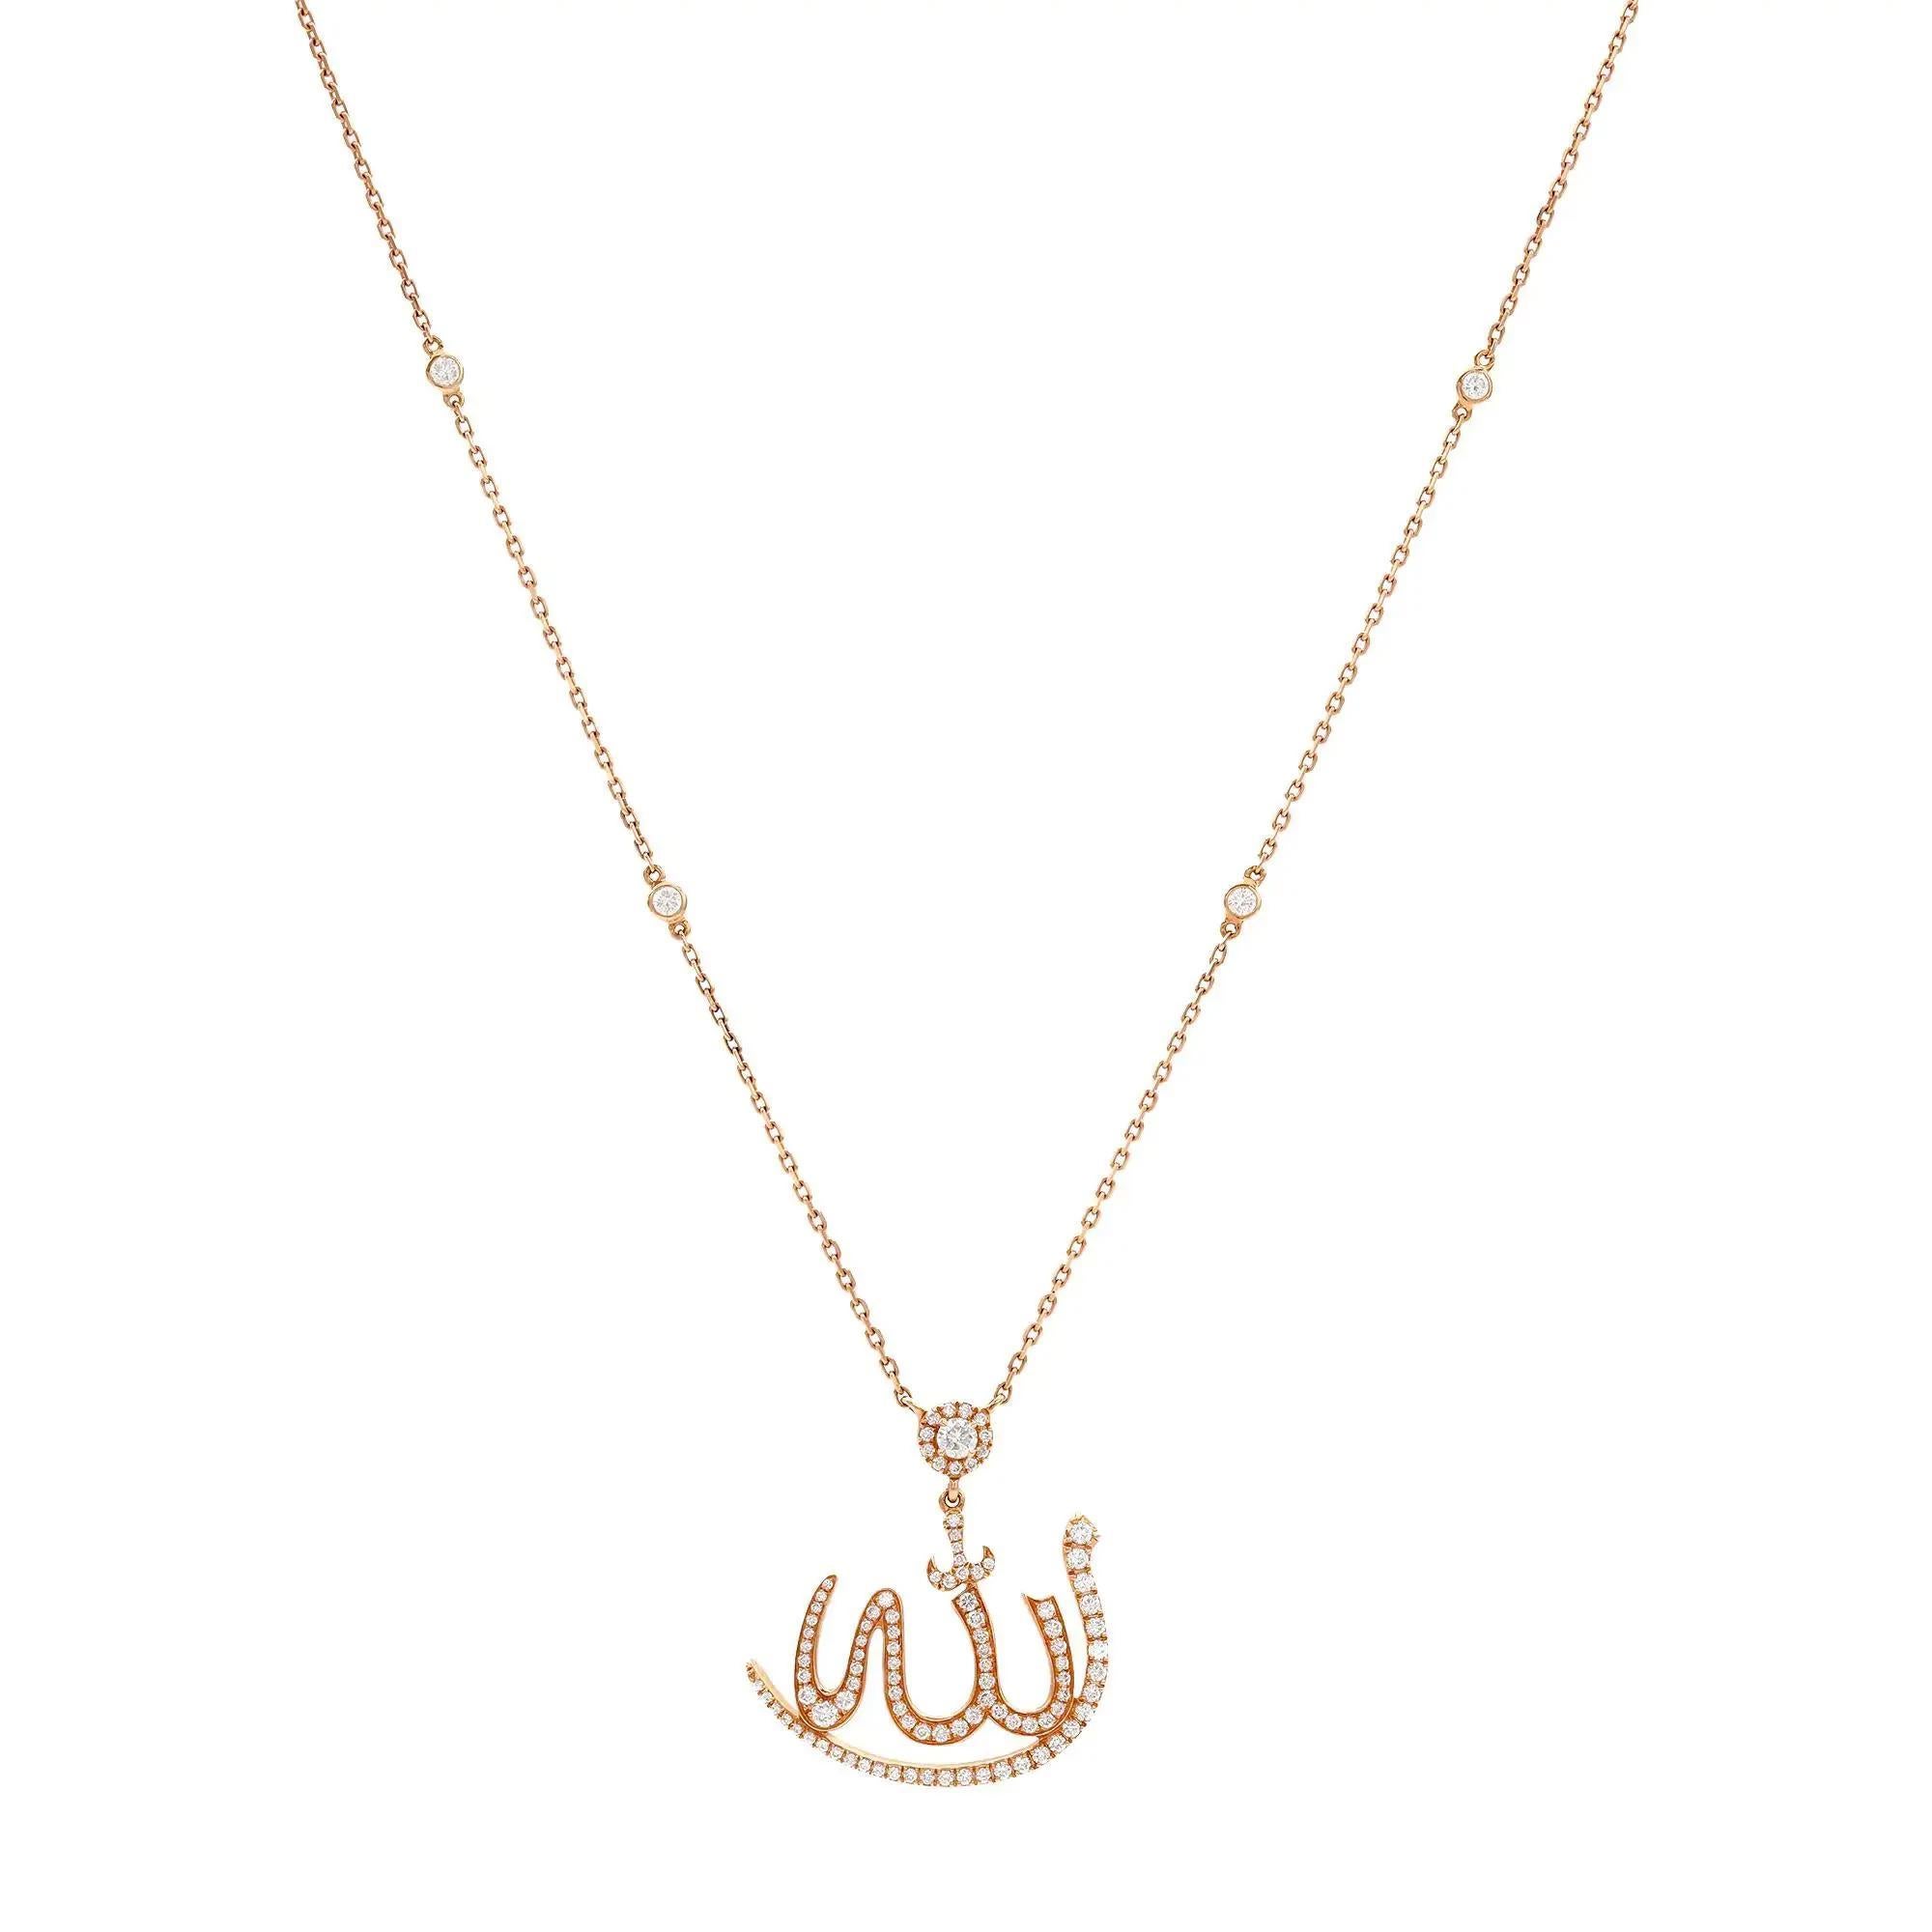 Messika 0.45Cttw Allah Diamond Pendant Necklace 18K Rose Gold 17.5 Inches For Sale